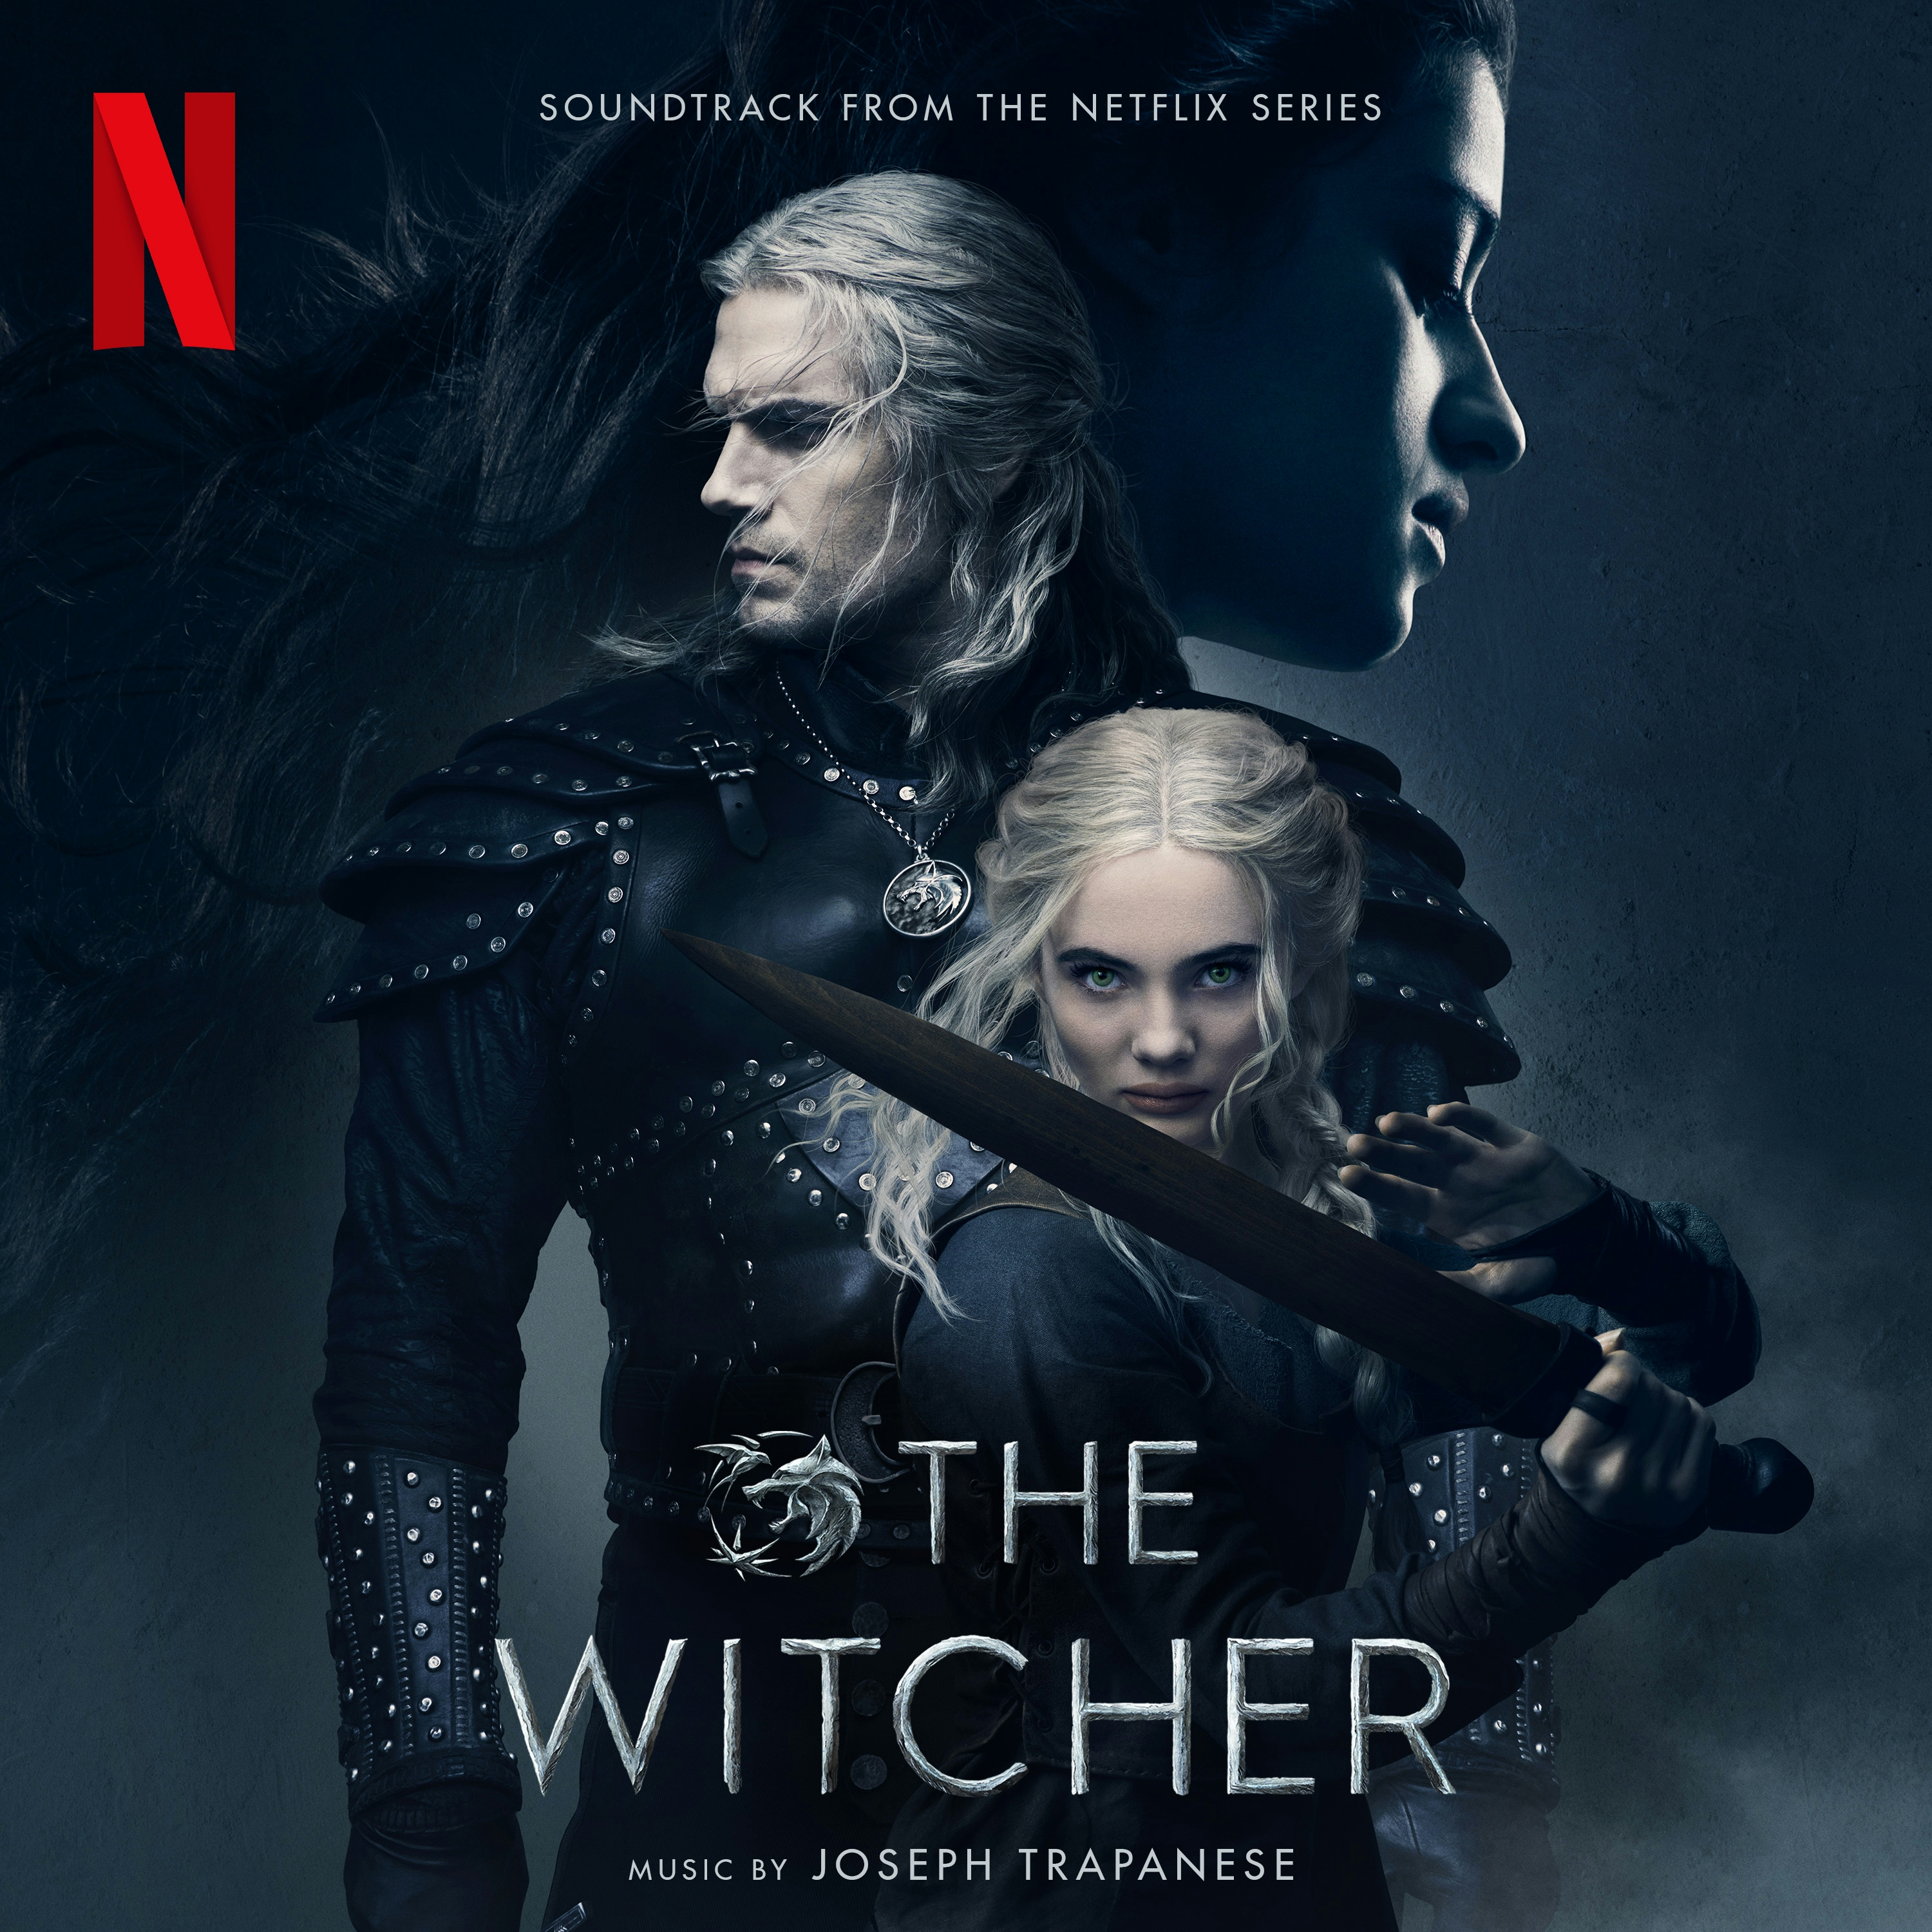 Album artwork for Album artwork for The Witcher: Season 2 (Soundtrack from the Netflix Original Series) by Joseph Trapanese by The Witcher: Season 2 (Soundtrack from the Netflix Original Series) - Joseph Trapanese